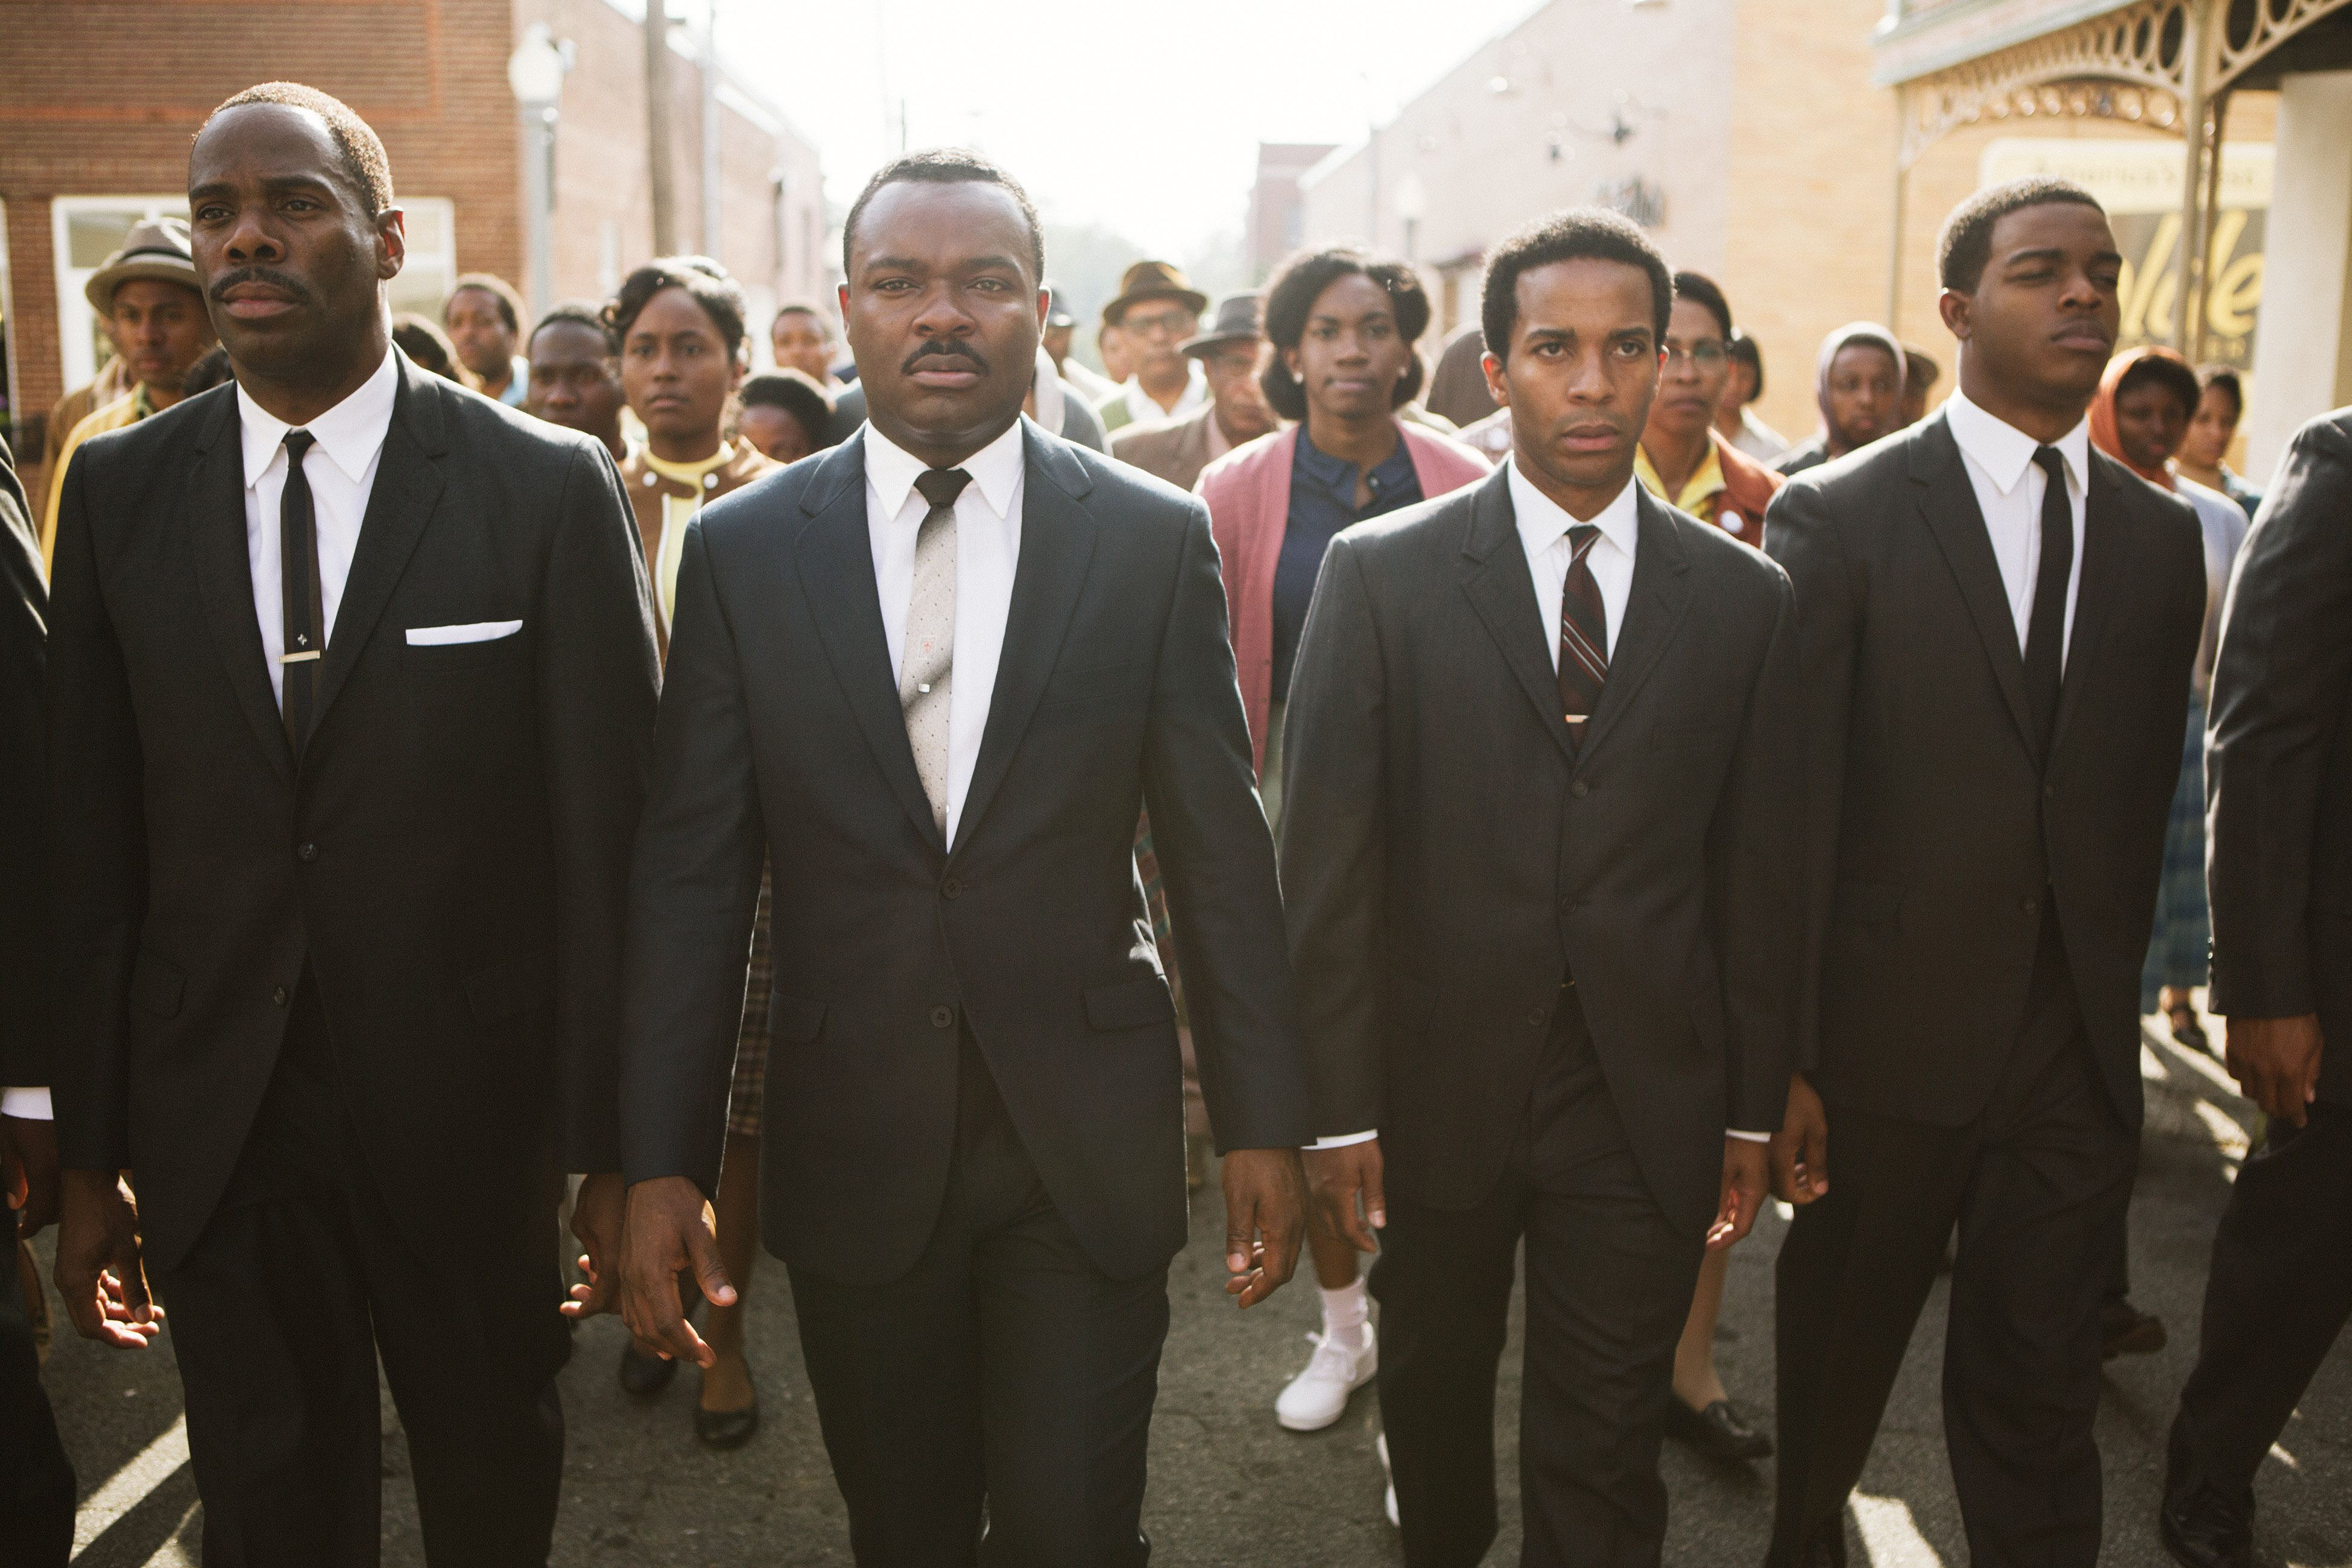 David Oyelowo (center), as Martin Luther King Jr., in Selma. (Paramount/Everett Collection)